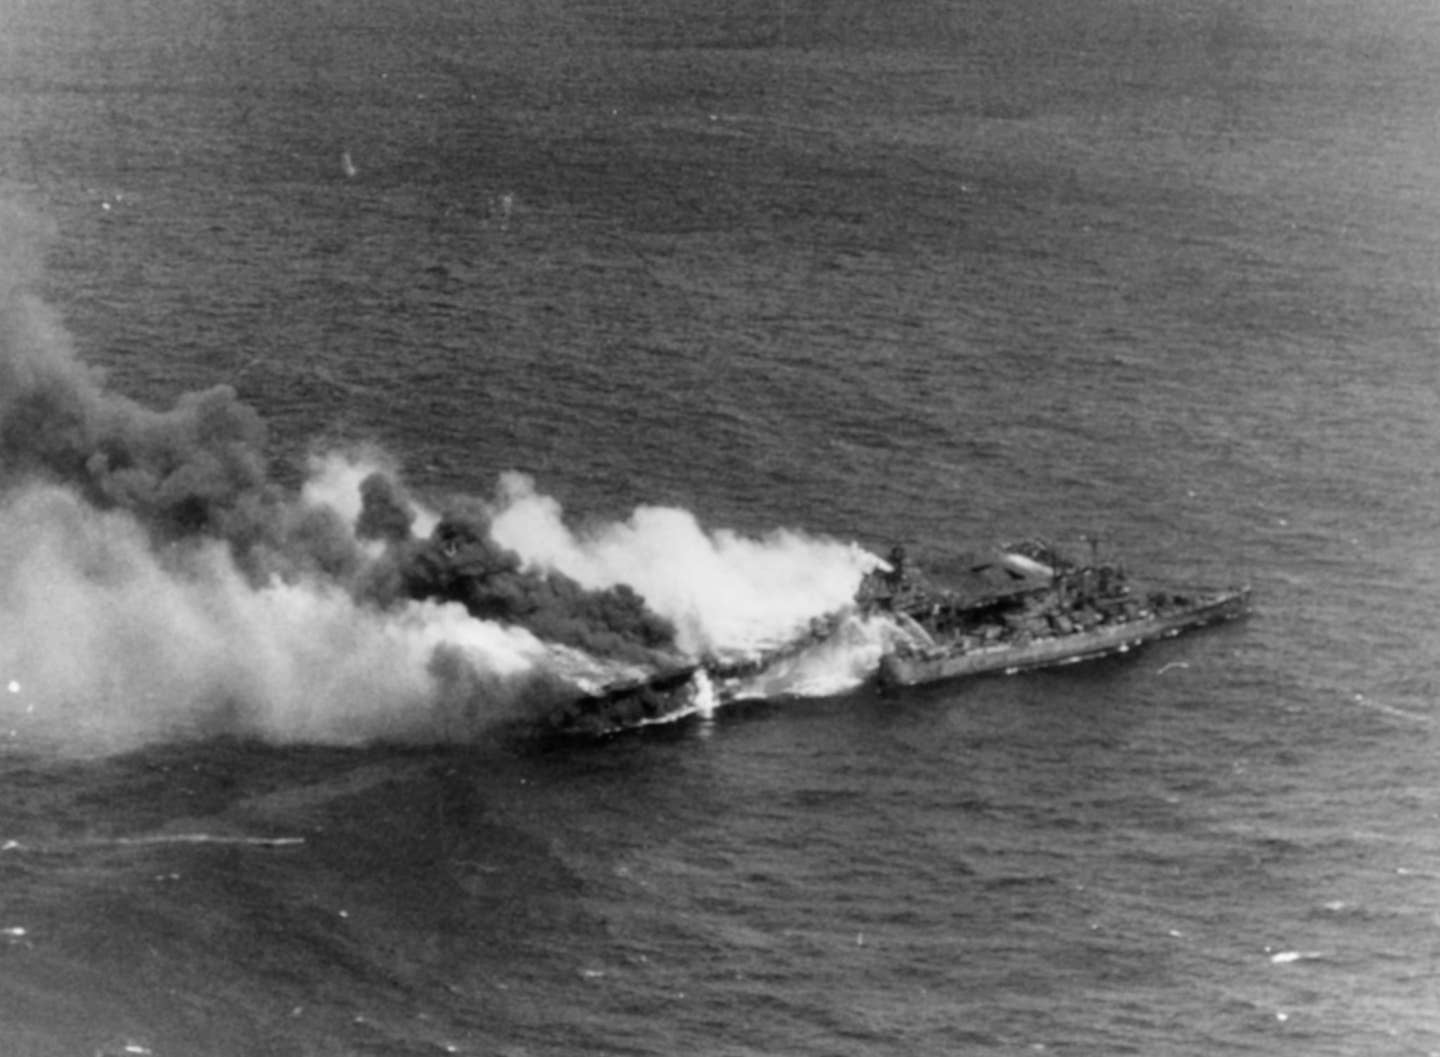 The U.S. aircraft carrier USS Franklin (CV-13) pictured burning in the waters off Japan after being hit during an air attack on March 19, 1945. The light cruiser USS Santa Fe (CL-60) is alongside. (US Navy photo)